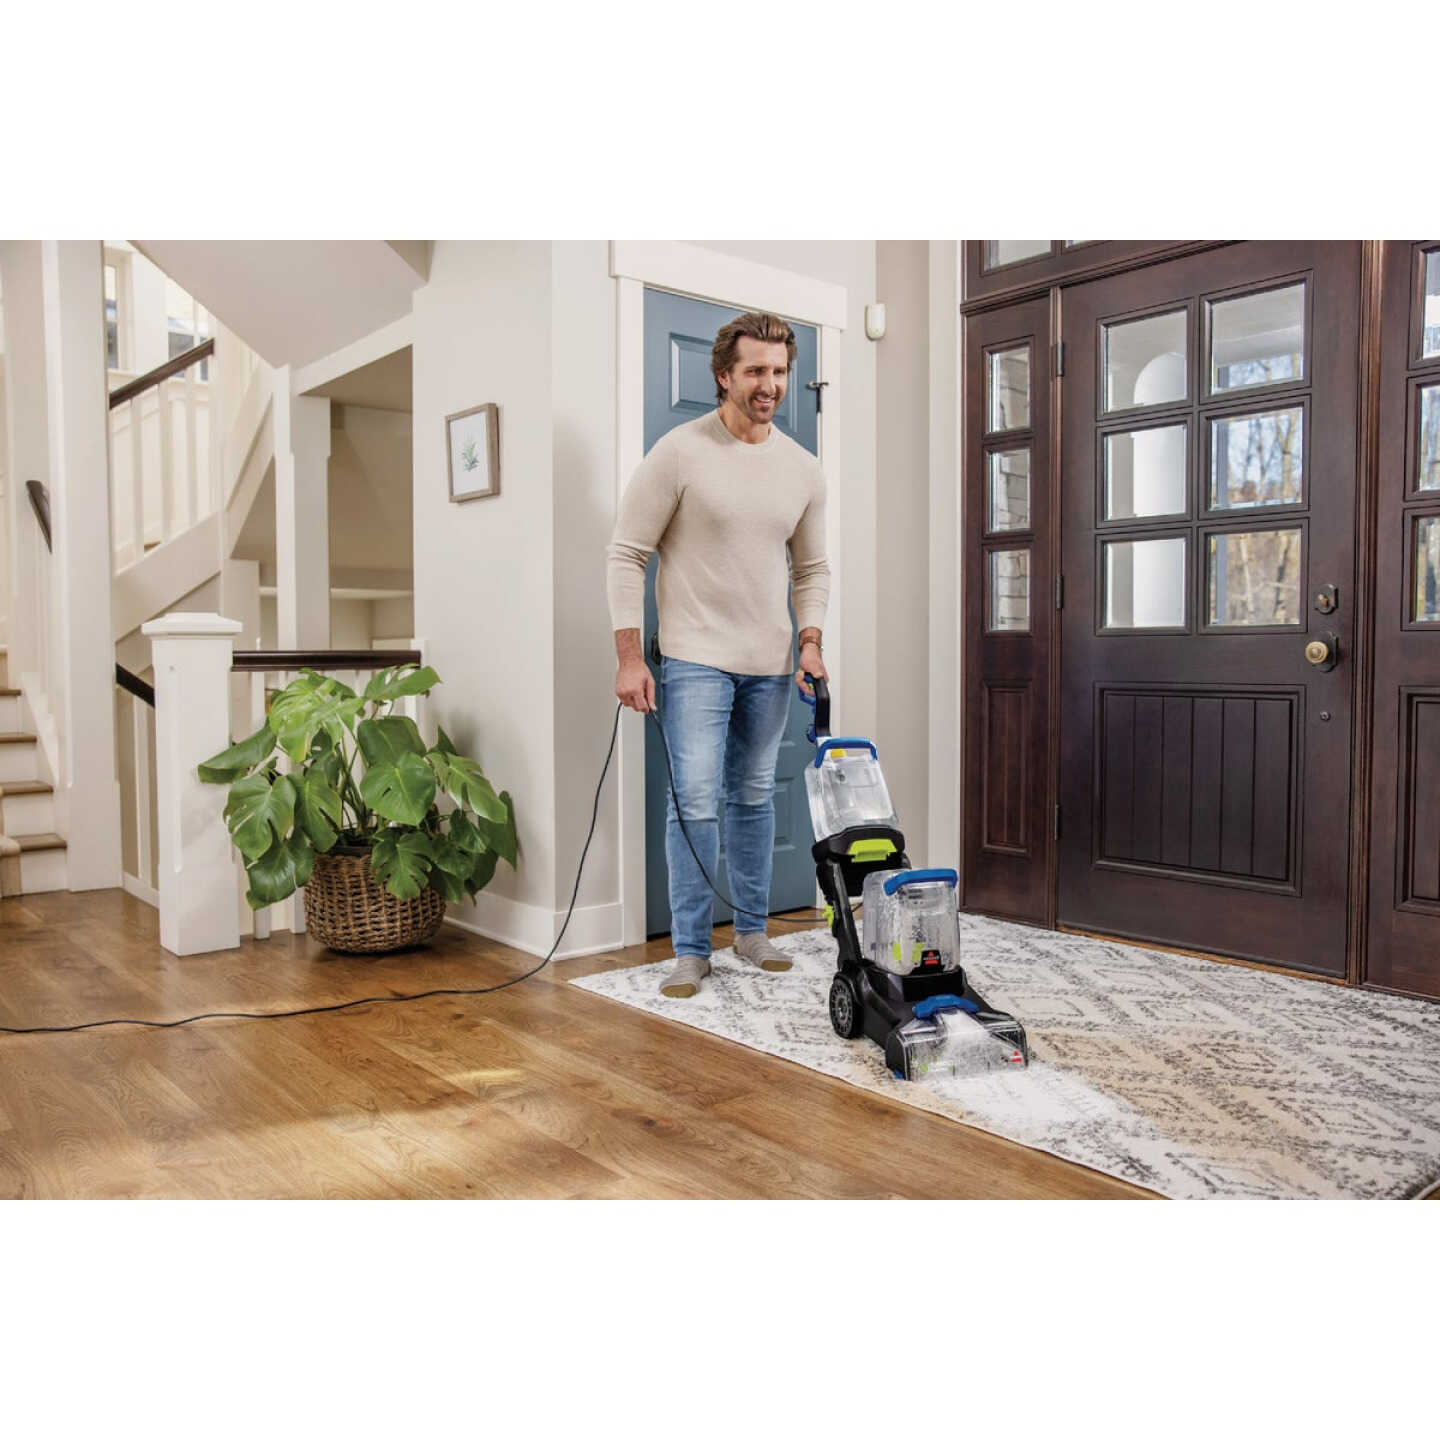 Bissell TurboClean DualPro Pet Carpet Cleaner - Power Townsend Company